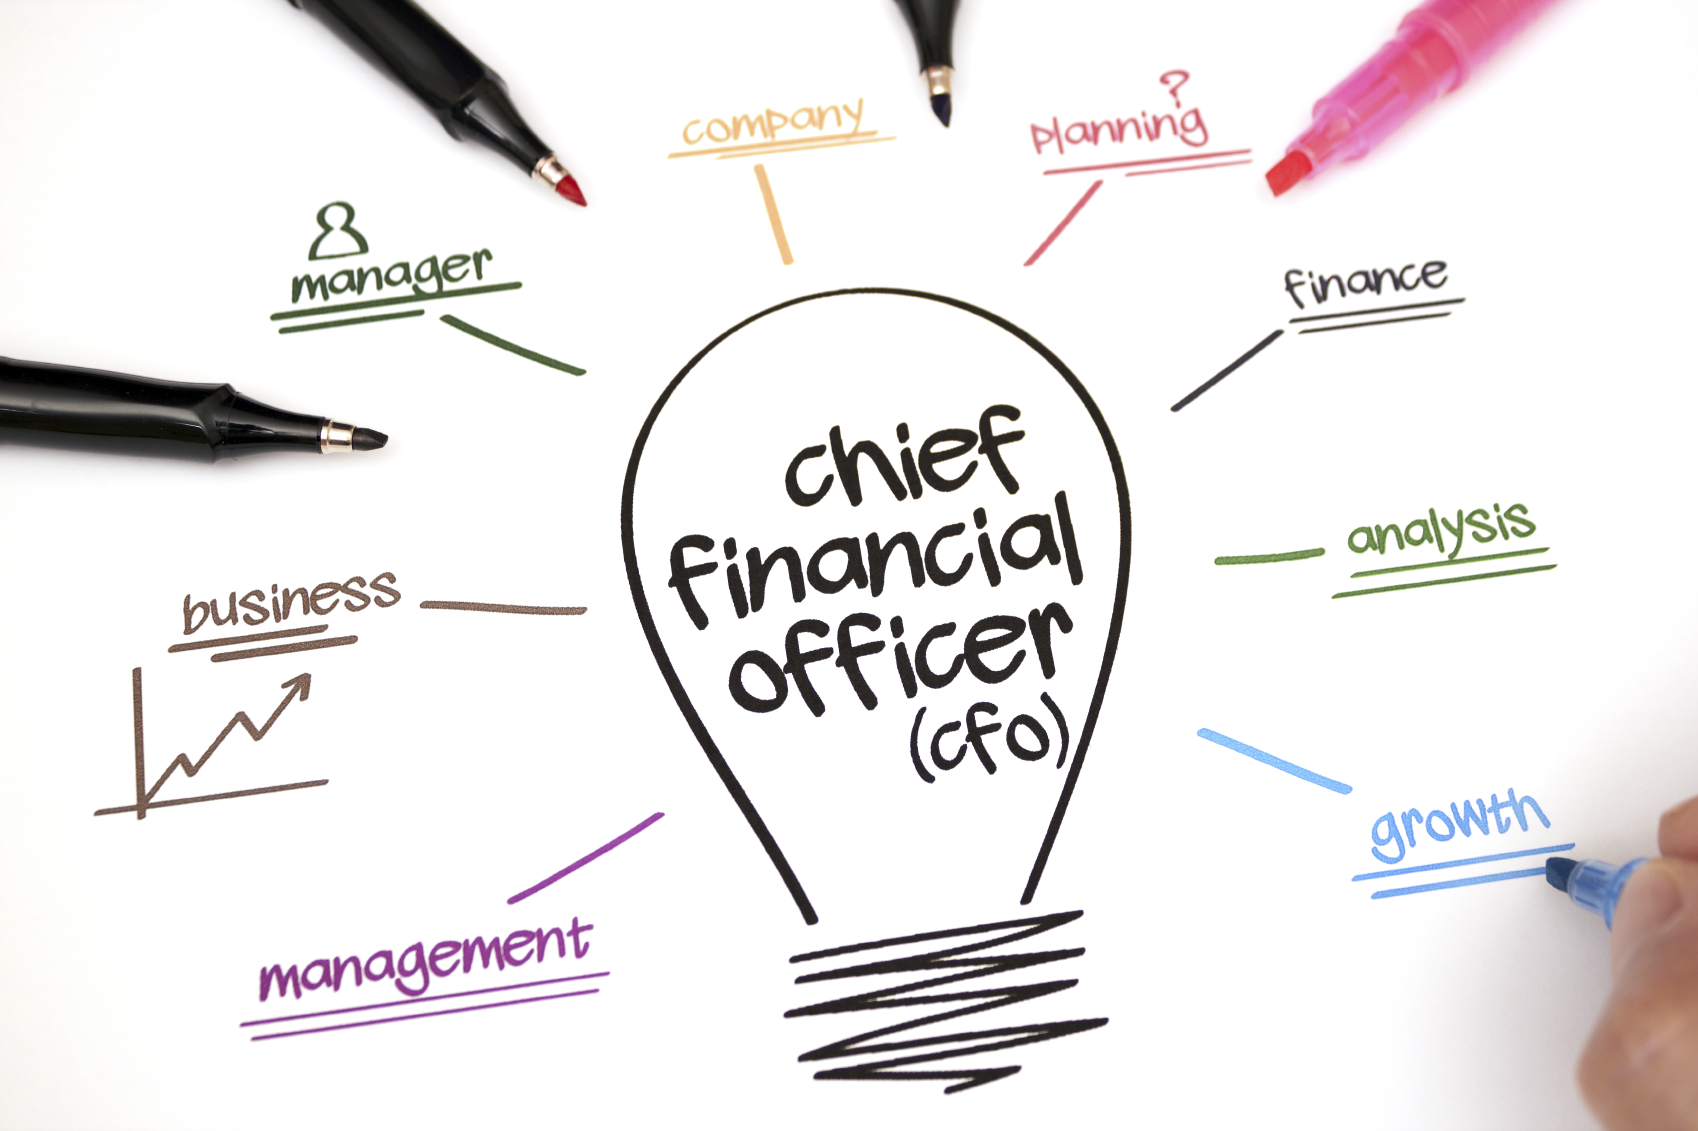 What are the benefits of facilities management software for the CFO?